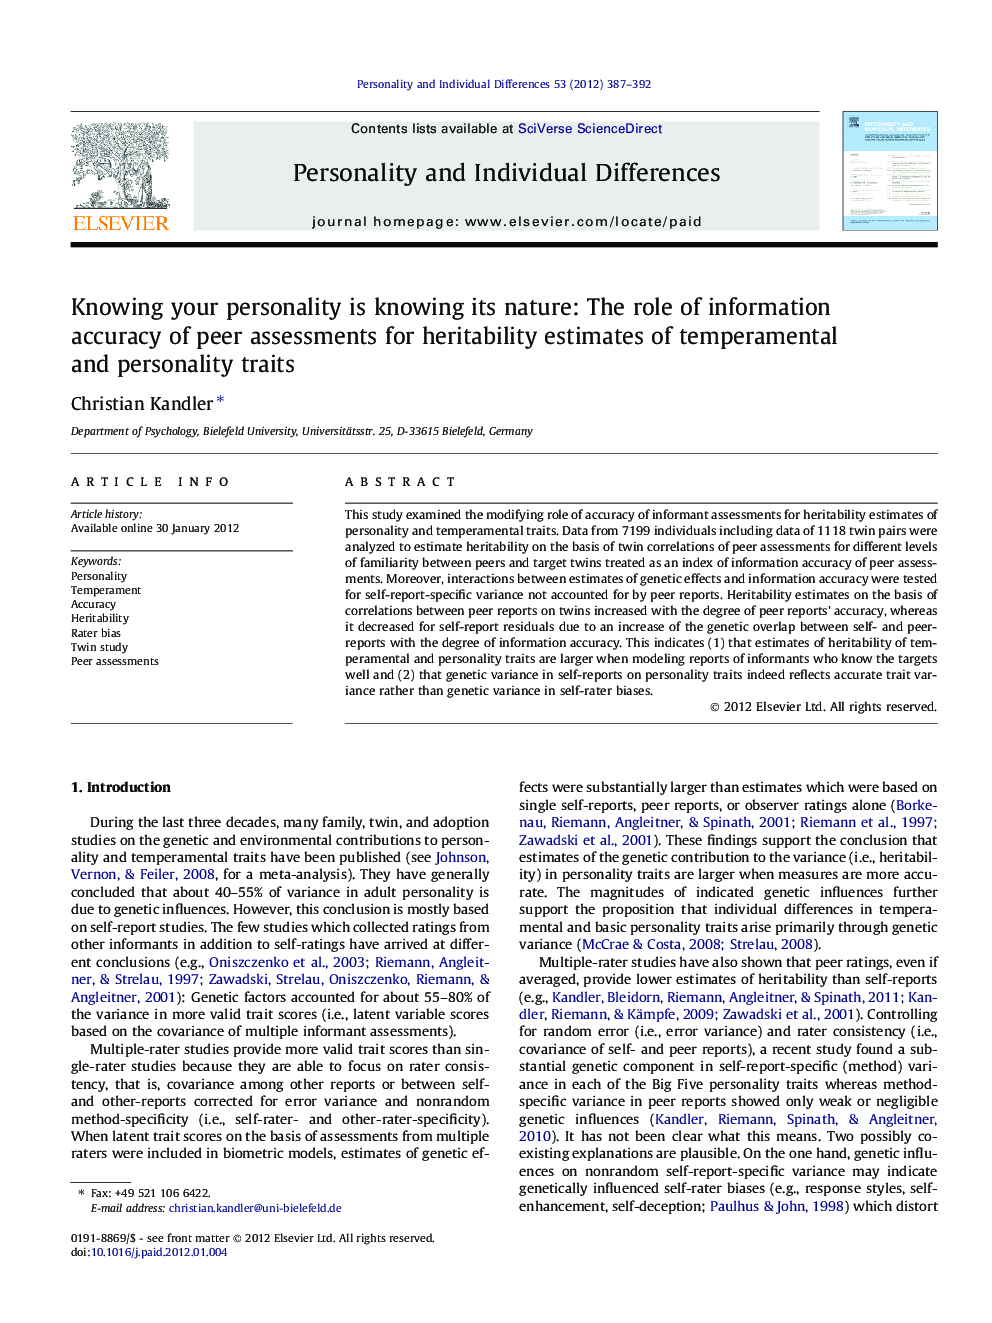 Knowing your personality is knowing its nature: The role of information accuracy of peer assessments for heritability estimates of temperamental and personality traits